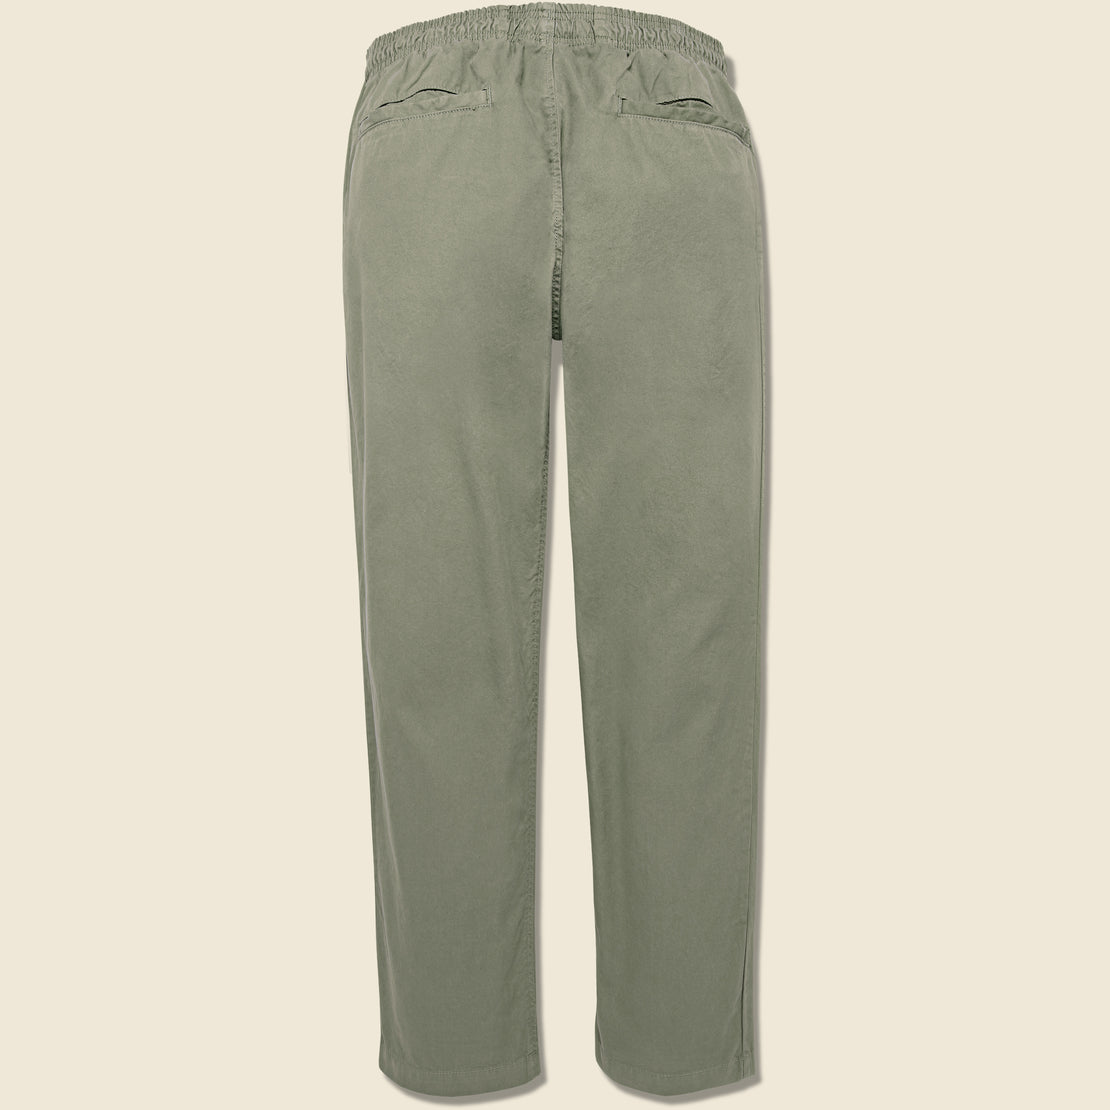 Twill Easy Chino  - Thyme - Save Khaki - STAG Provisions - Pants - Twill